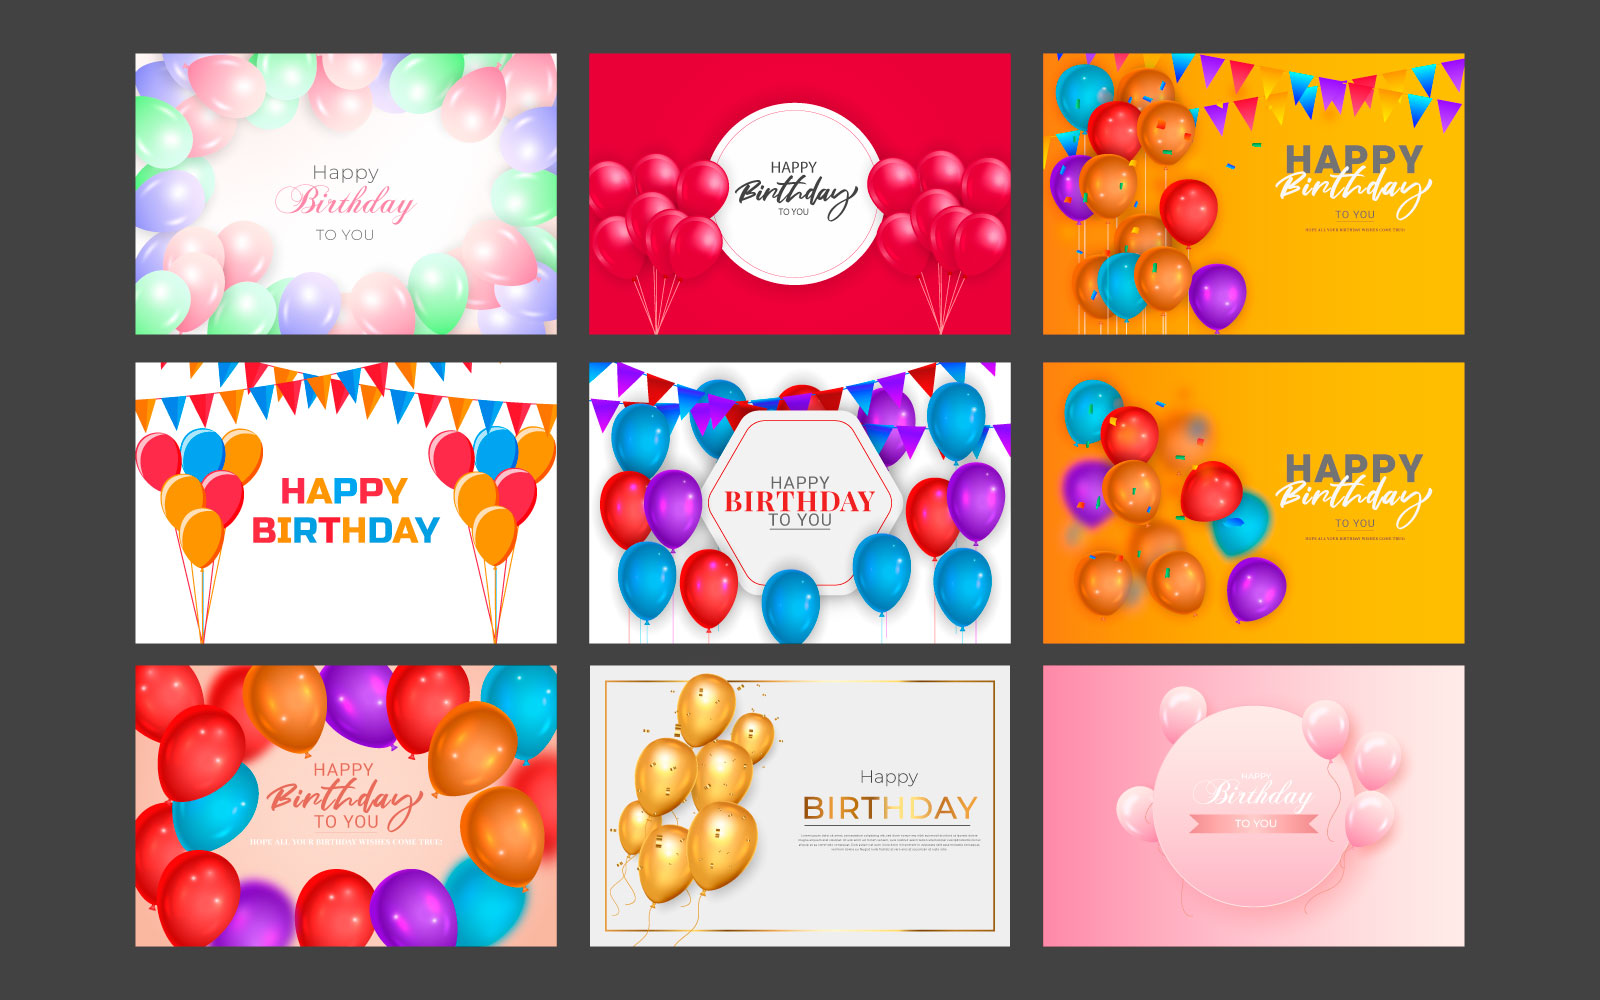 Birthday banner template set design . Happy birthday to you text in white space background